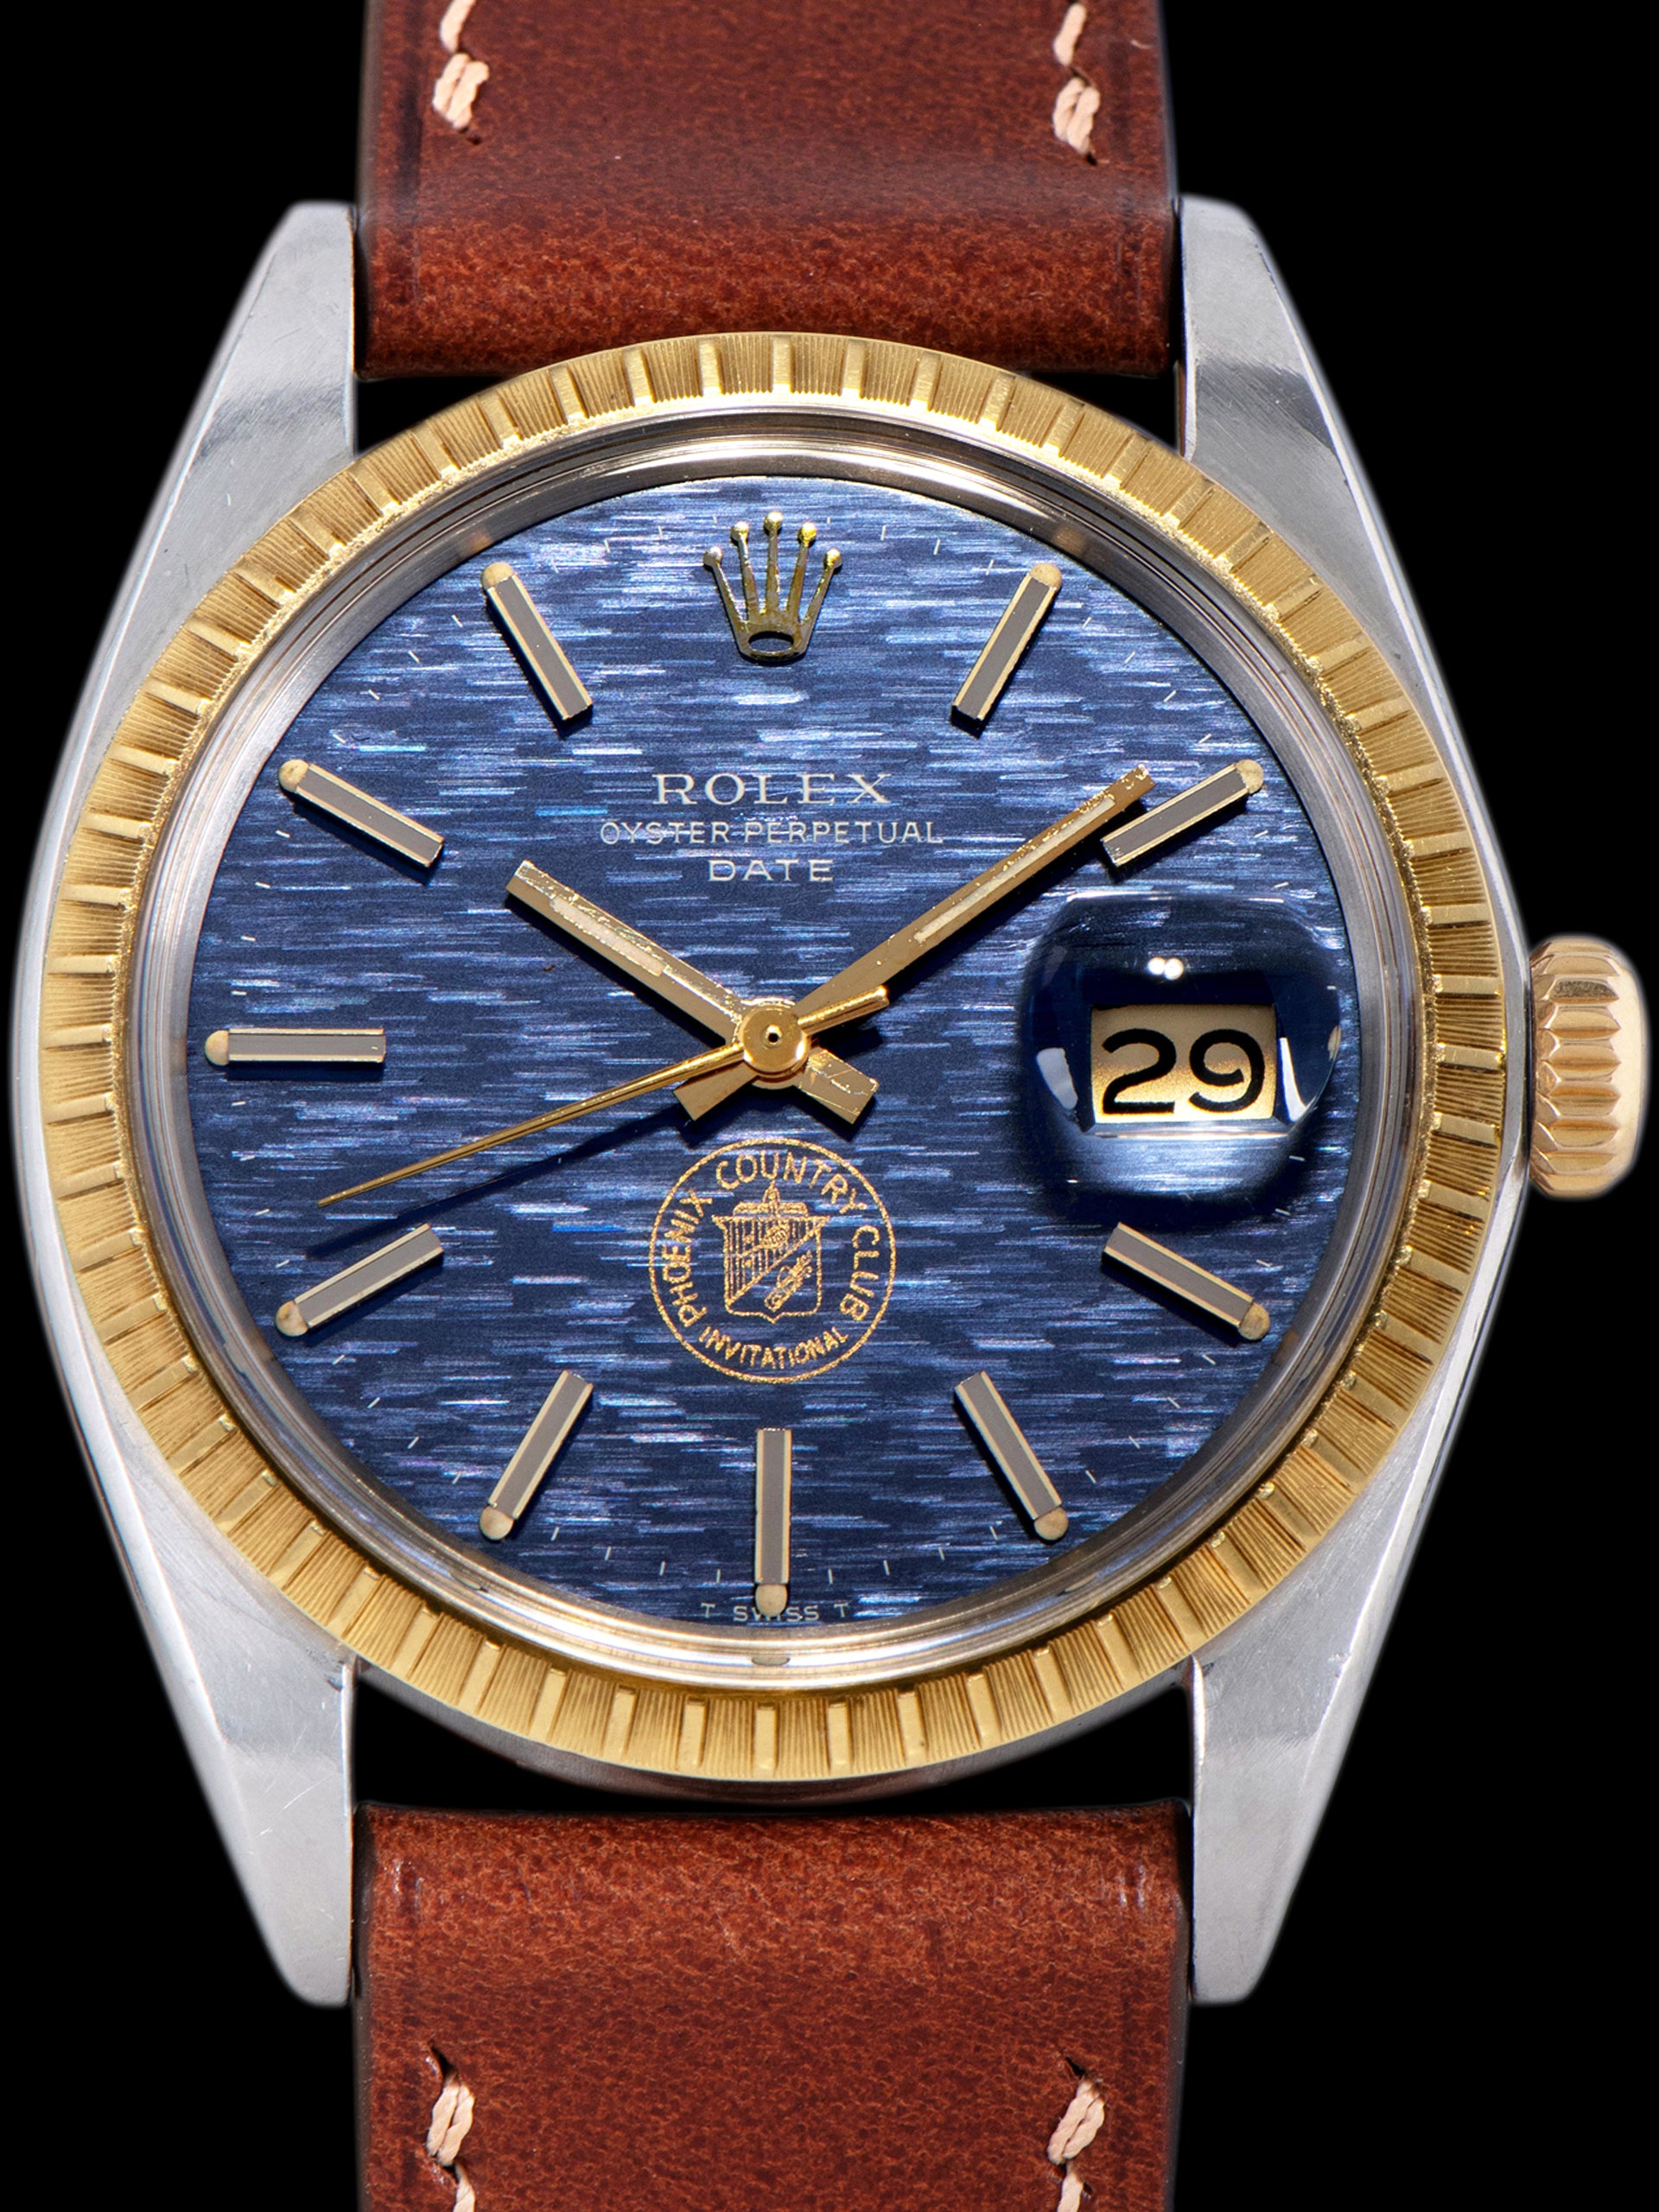 1971 Rolex Two-Tone Oyster-Perpetual Date (Ref. 1505) Blue Mosaic "Phoenix Country Club" Dial